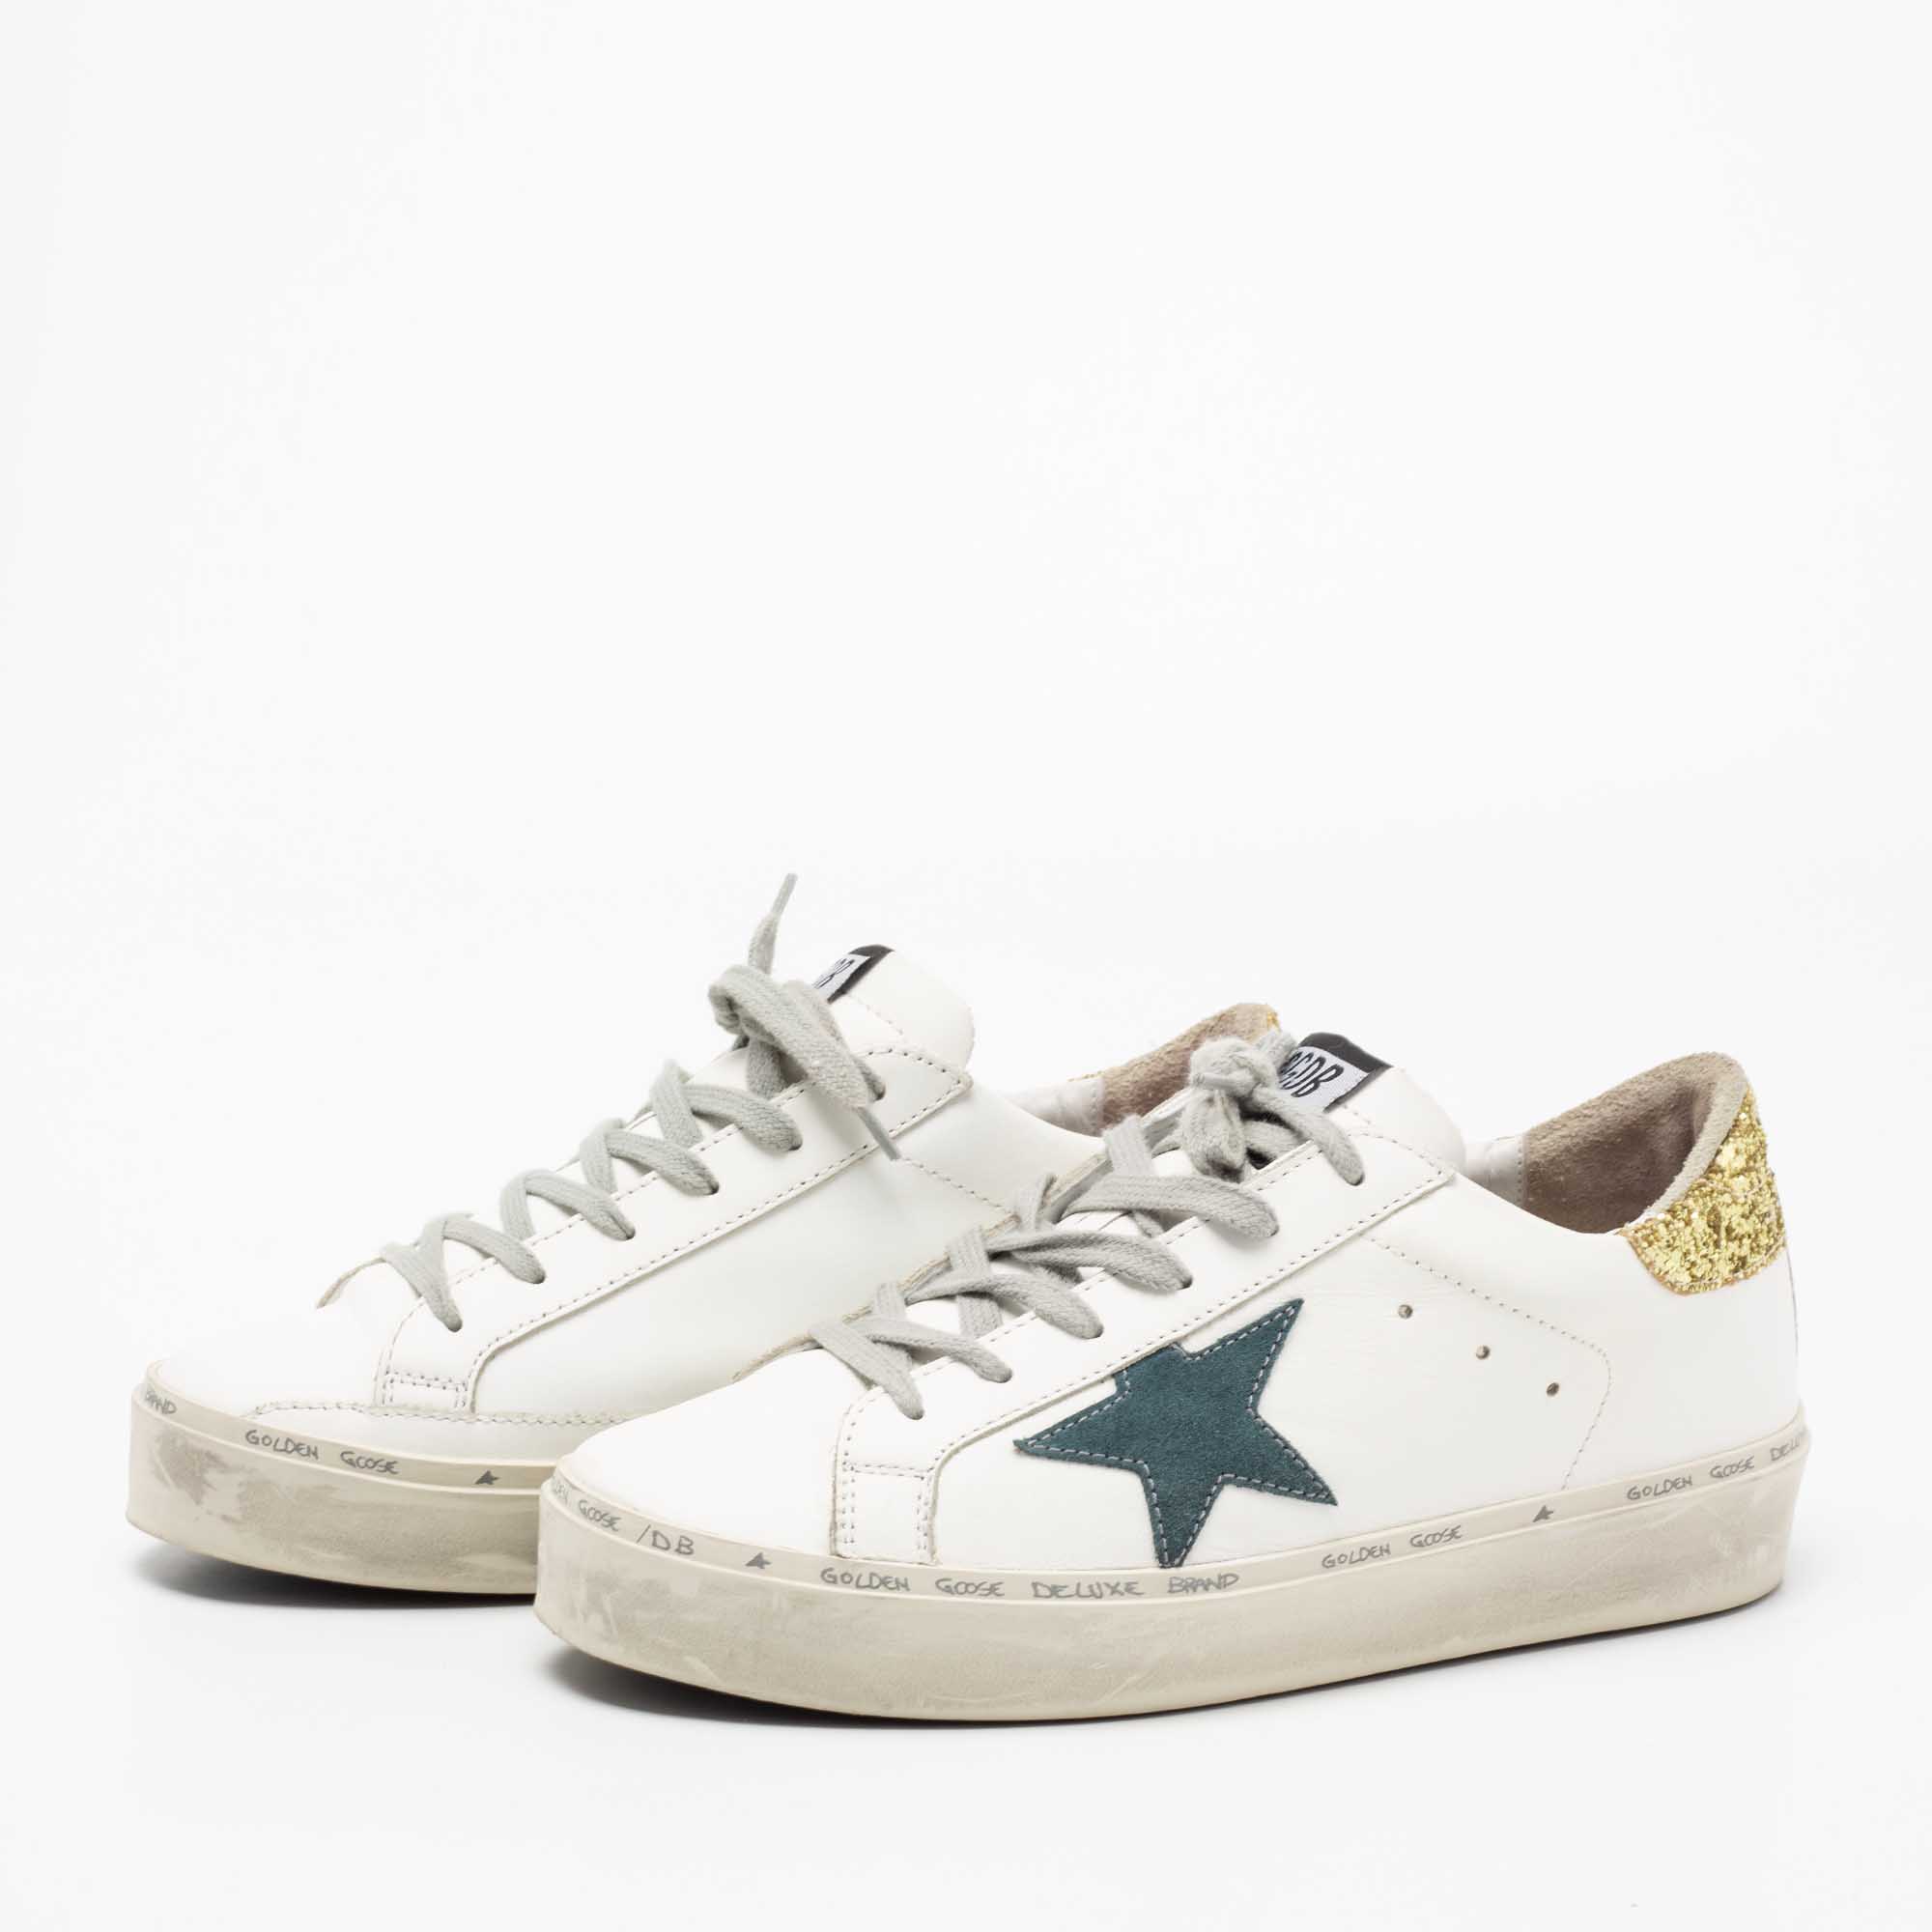 

Golden Goose White/Yellow Leather and Glitter Hi Star Low-Top Sneakers Size